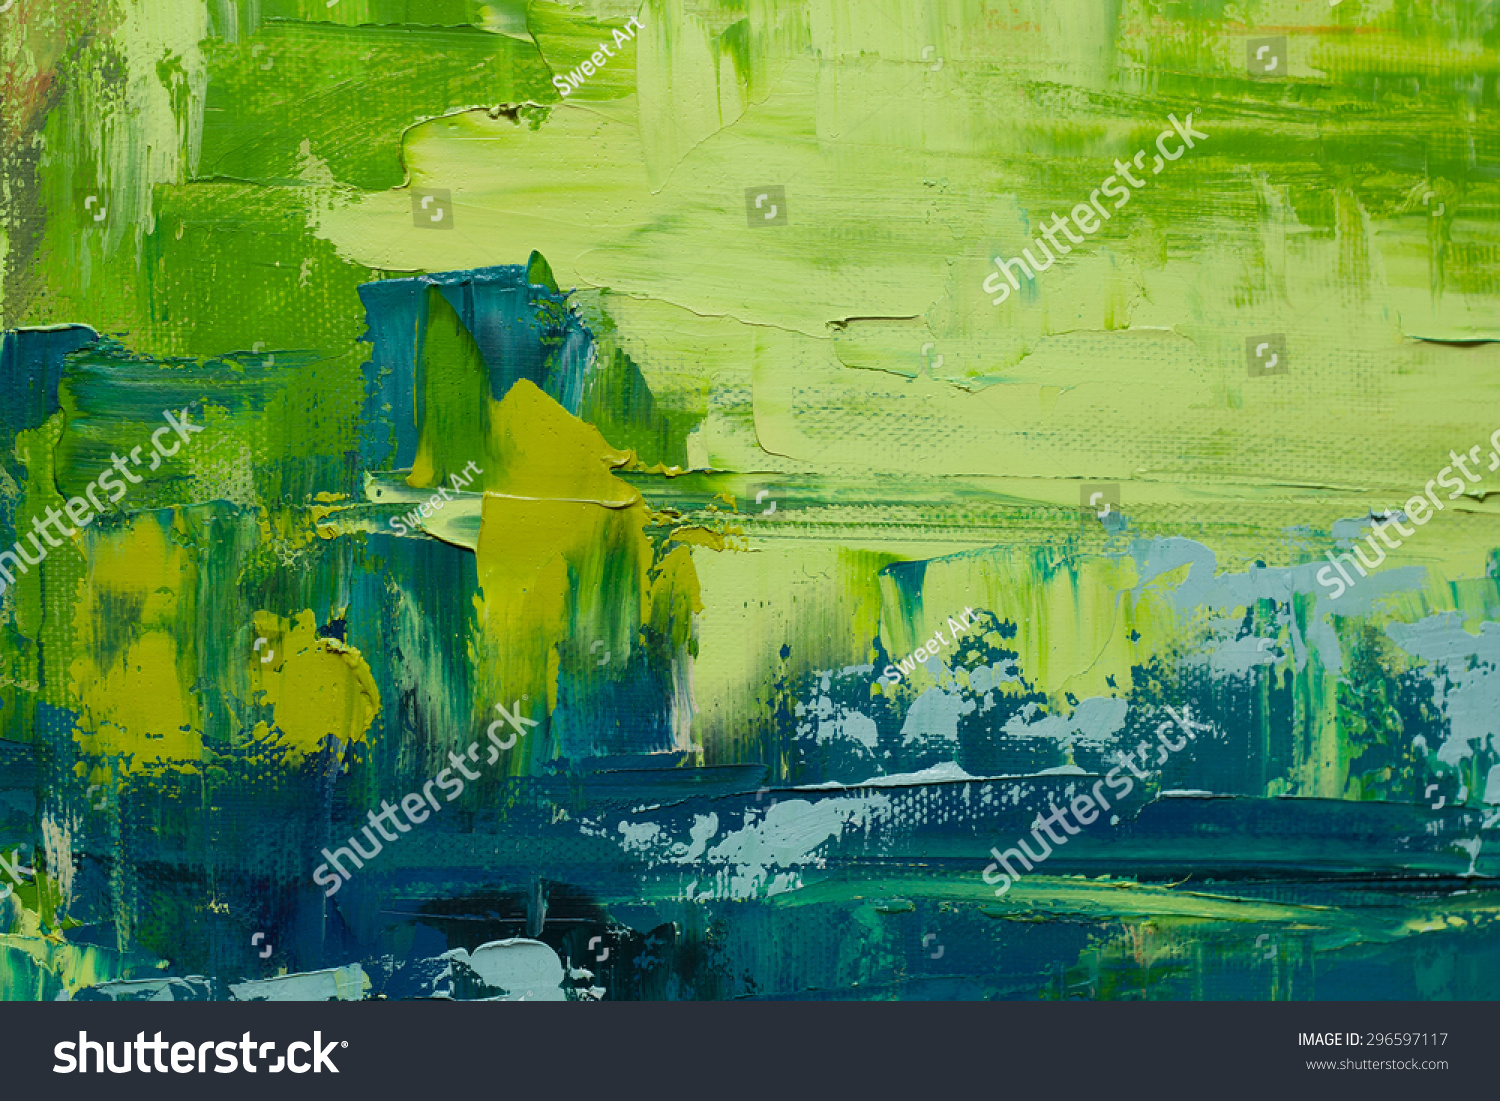 Abstract art  background. Oil painting on canvas. Green and yellow  texture. Fragment of artwork. Spots of oil paint. Brushstrokes of paint. Modern art. Contemporary art. #296597117